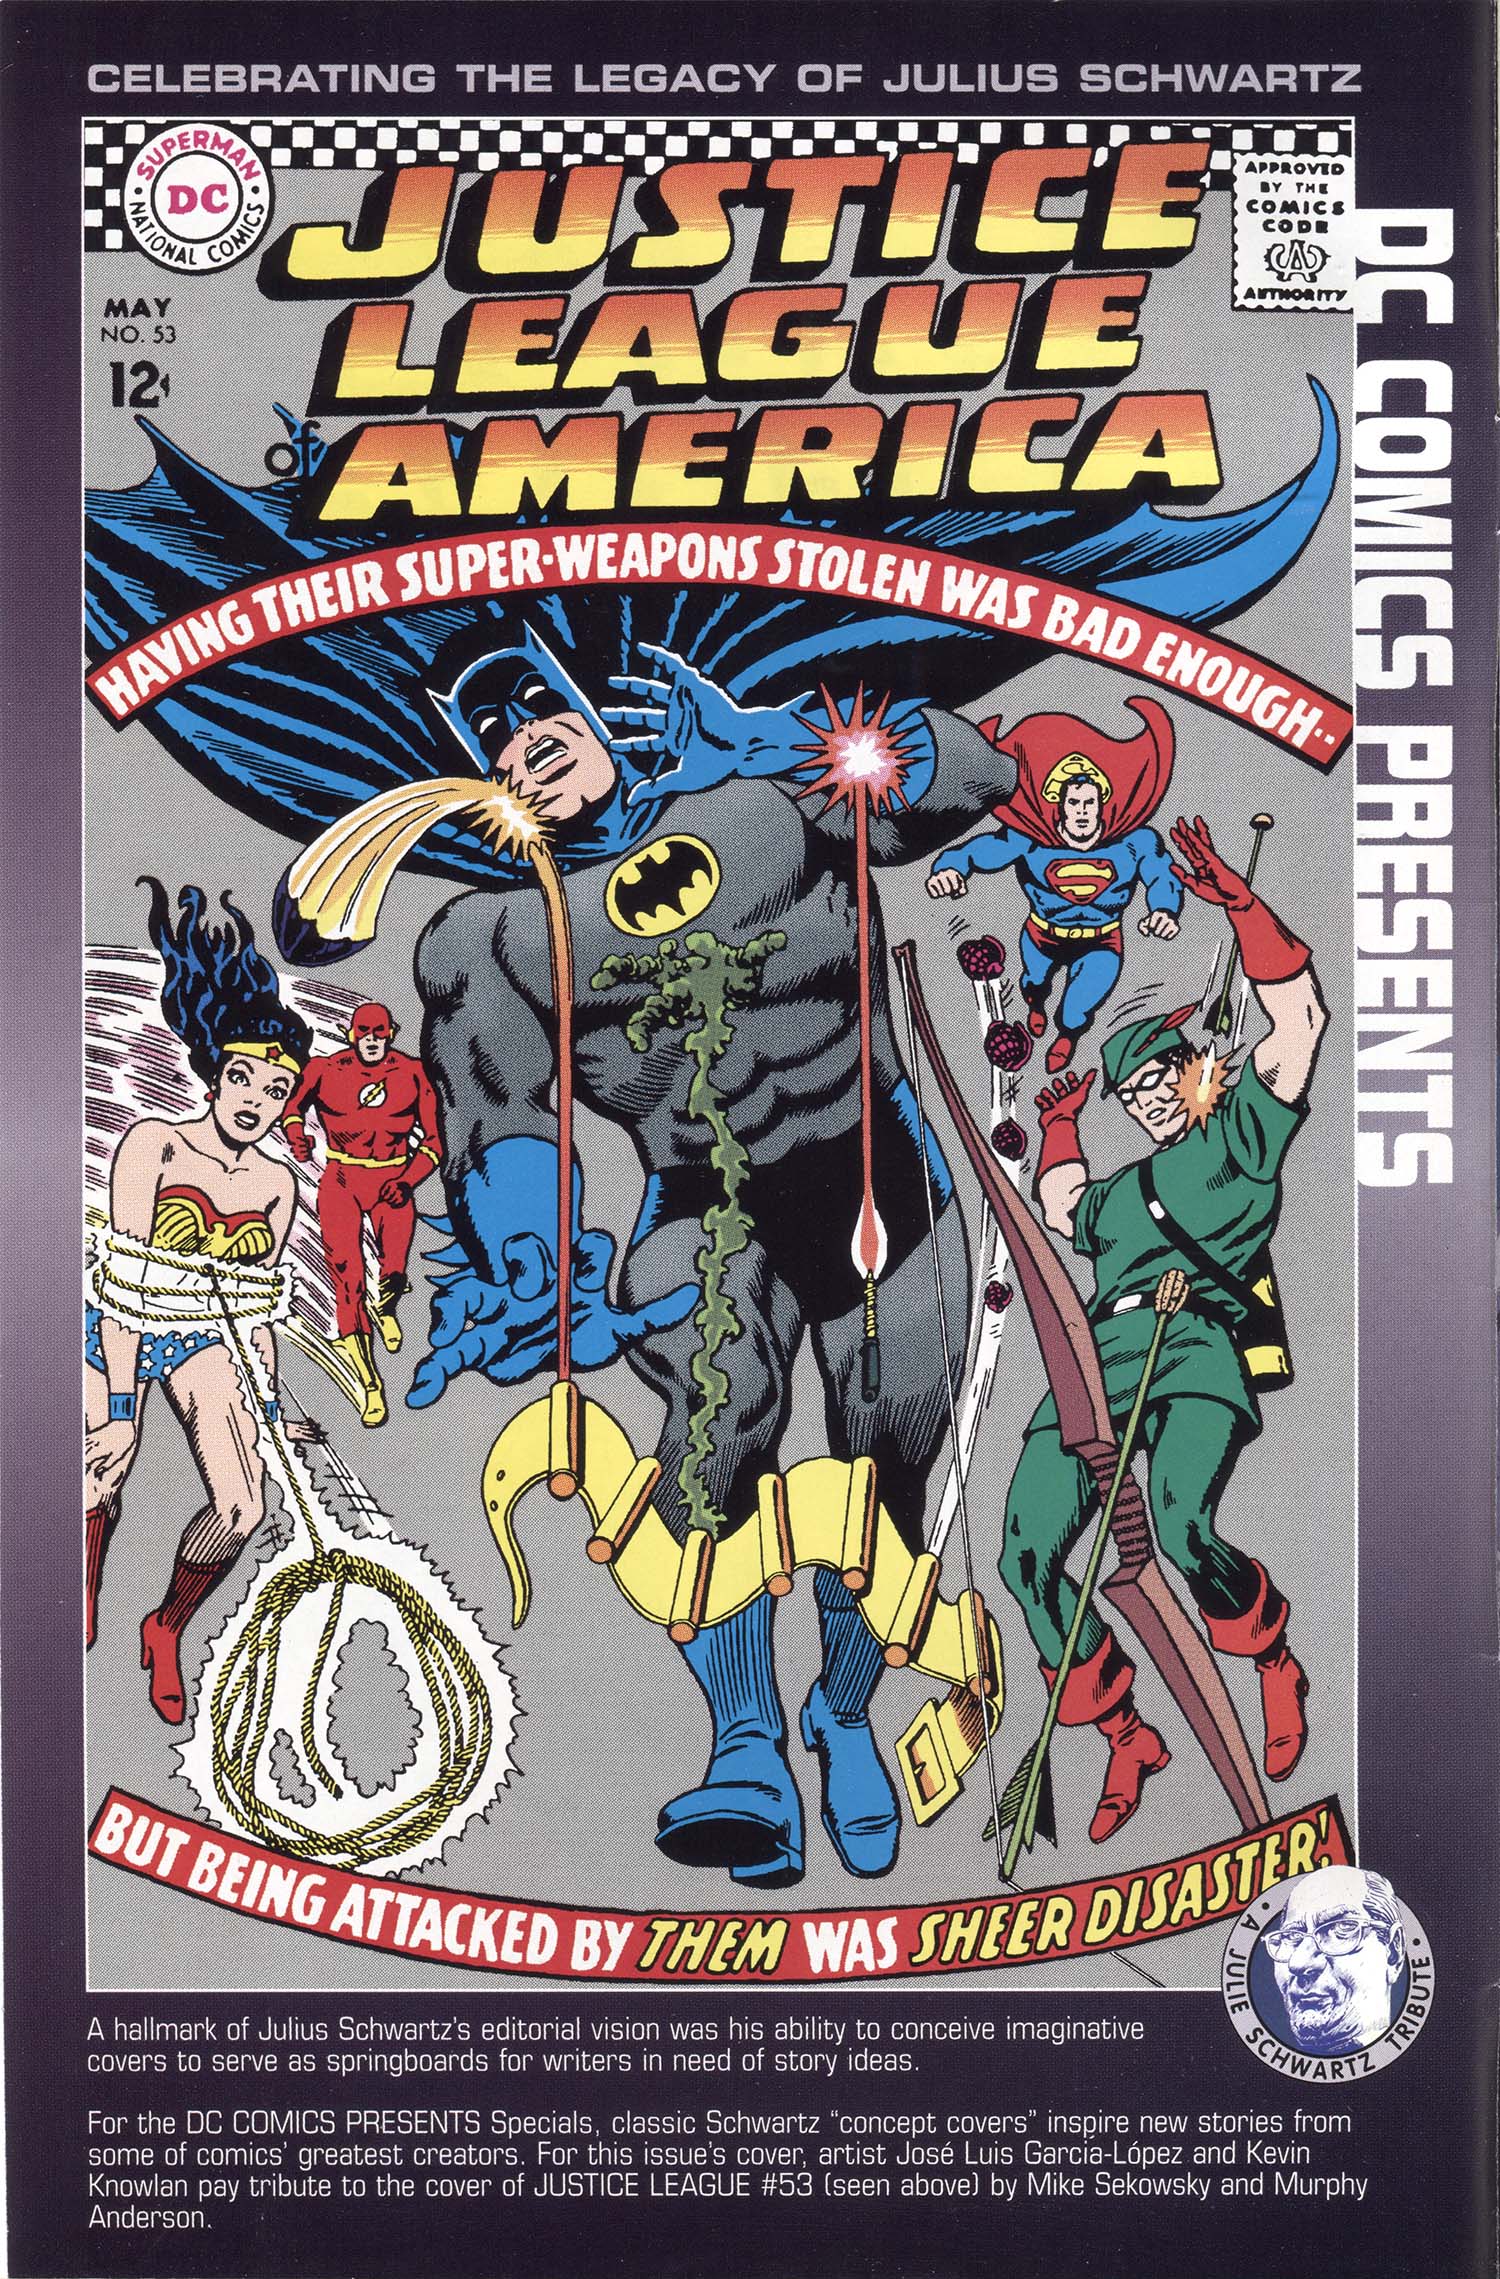 DC Comics Presents: Justice League of America, inside front cover, art by Mike Sekowsky & Murphy Anderson